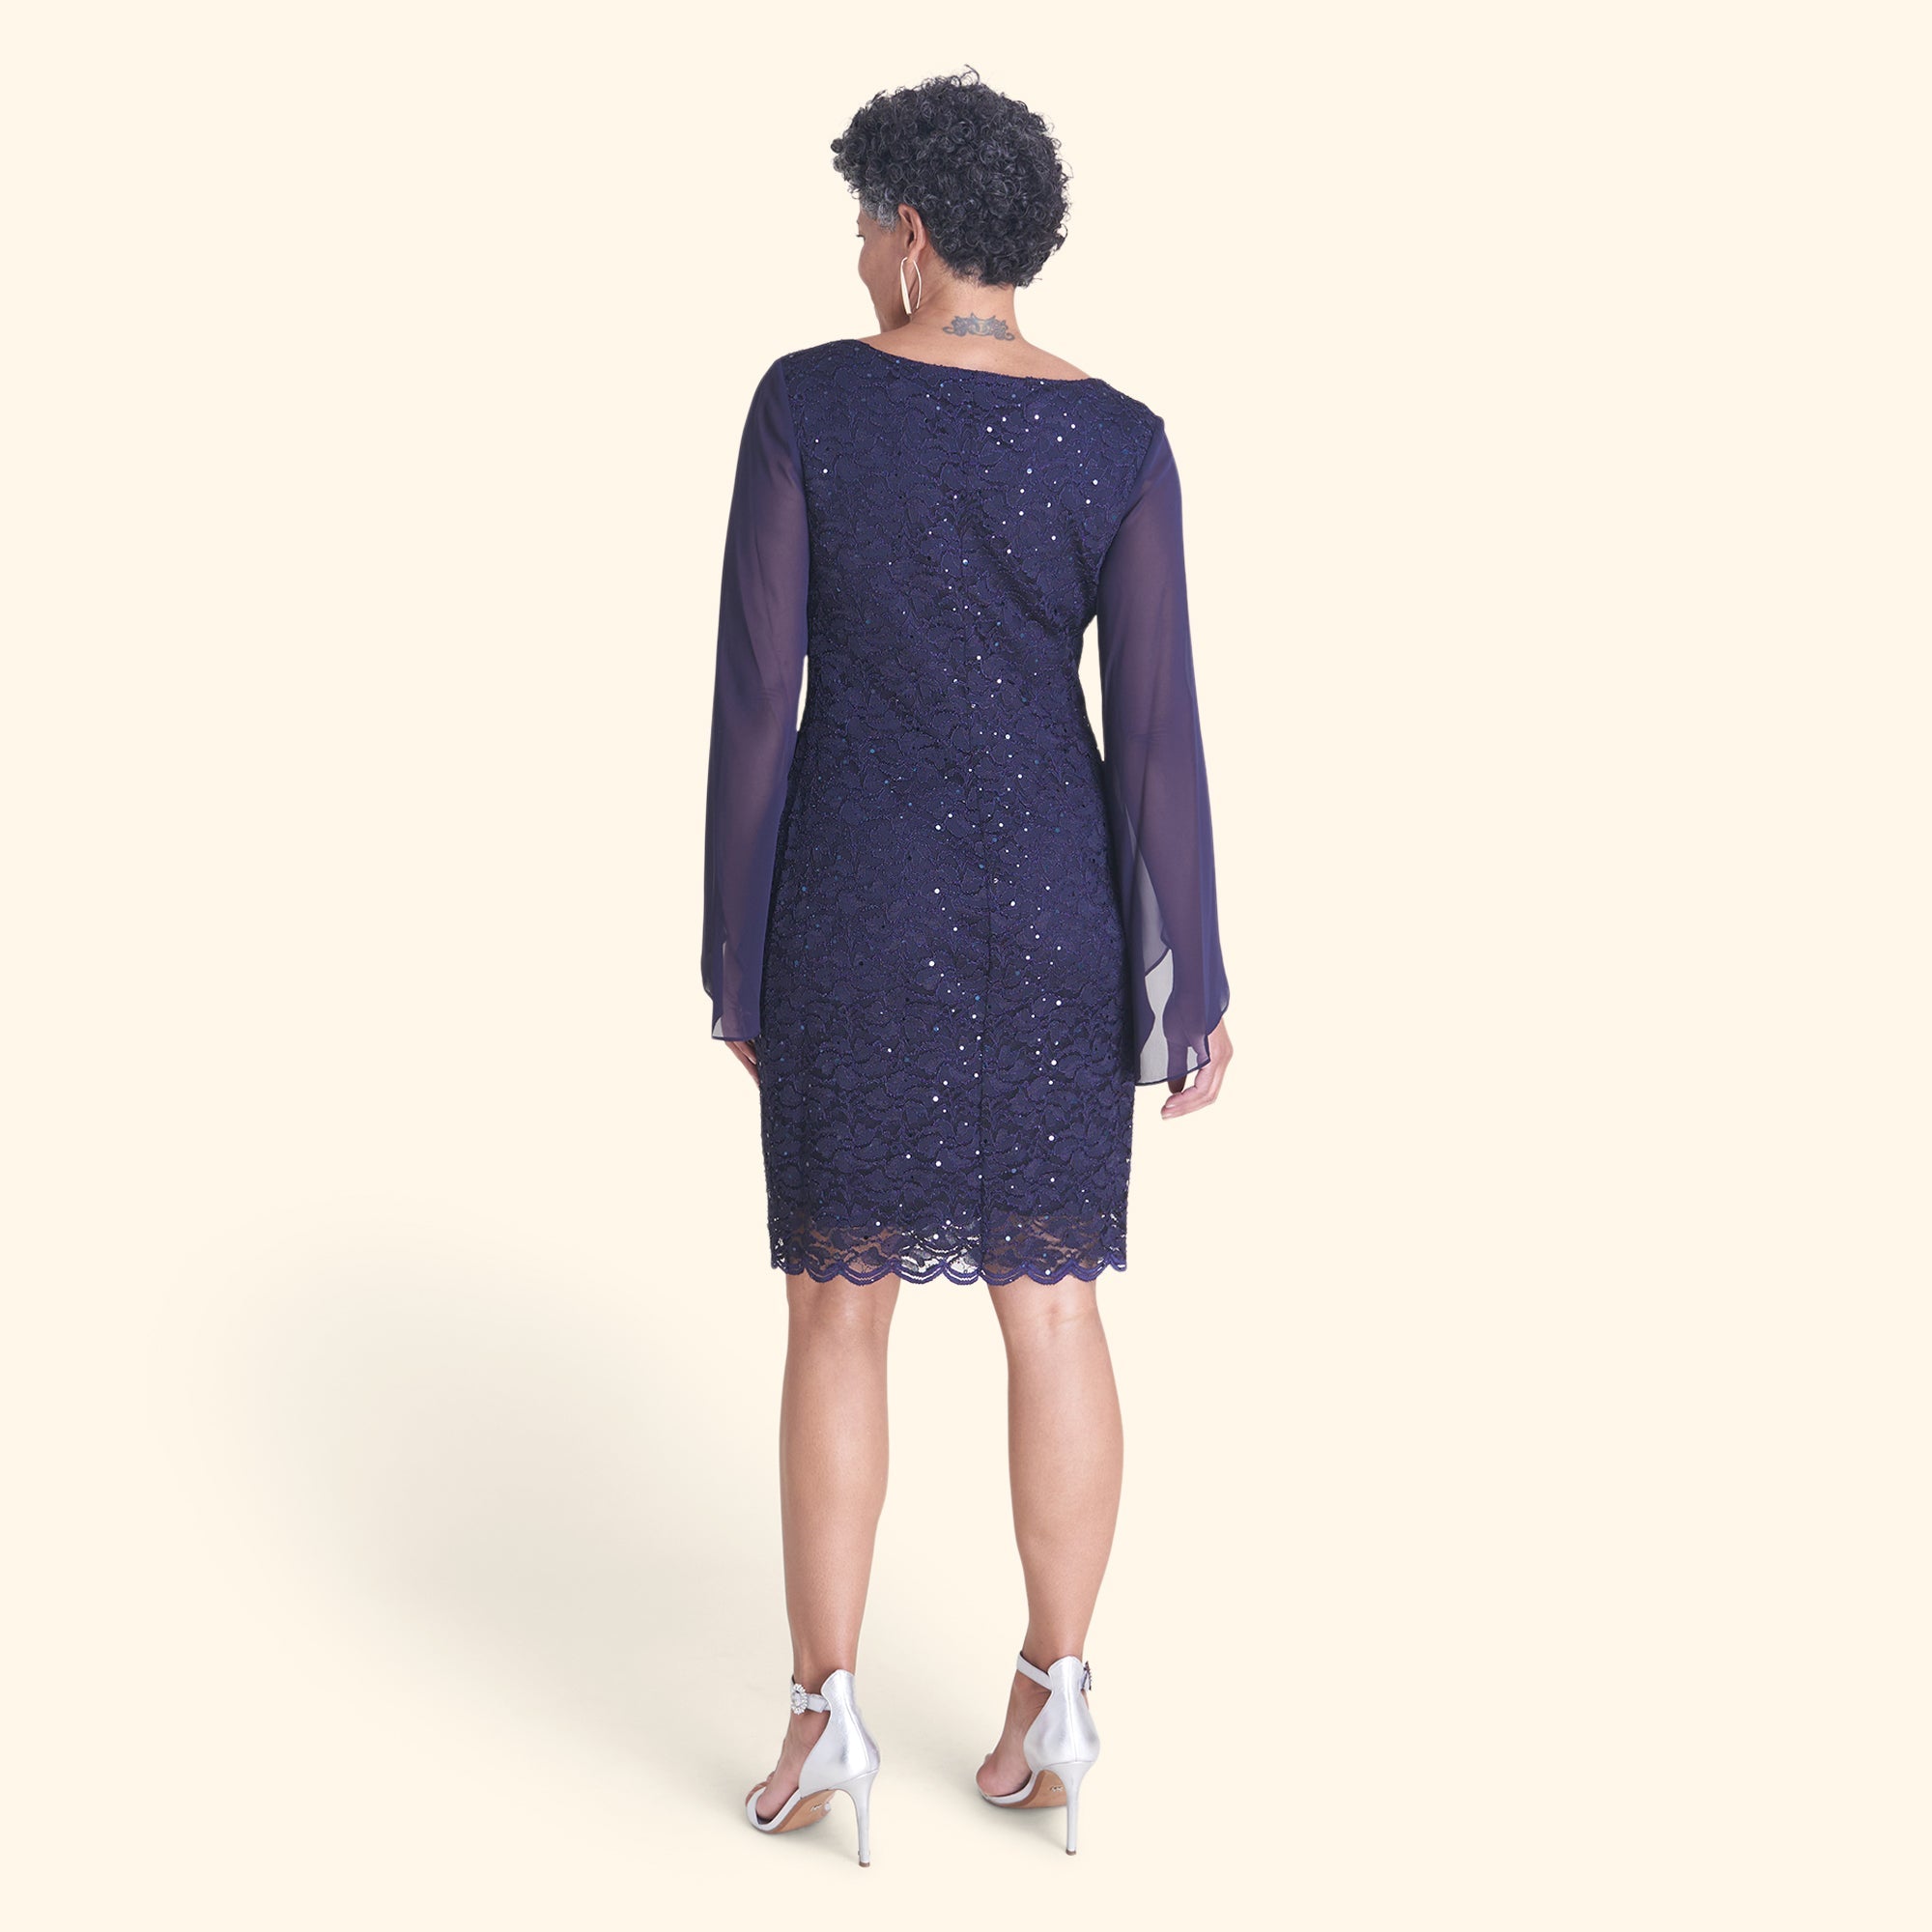 Woman posing wearing Navy Stevie Navy Sequin Lace Dress from Connected Apparel